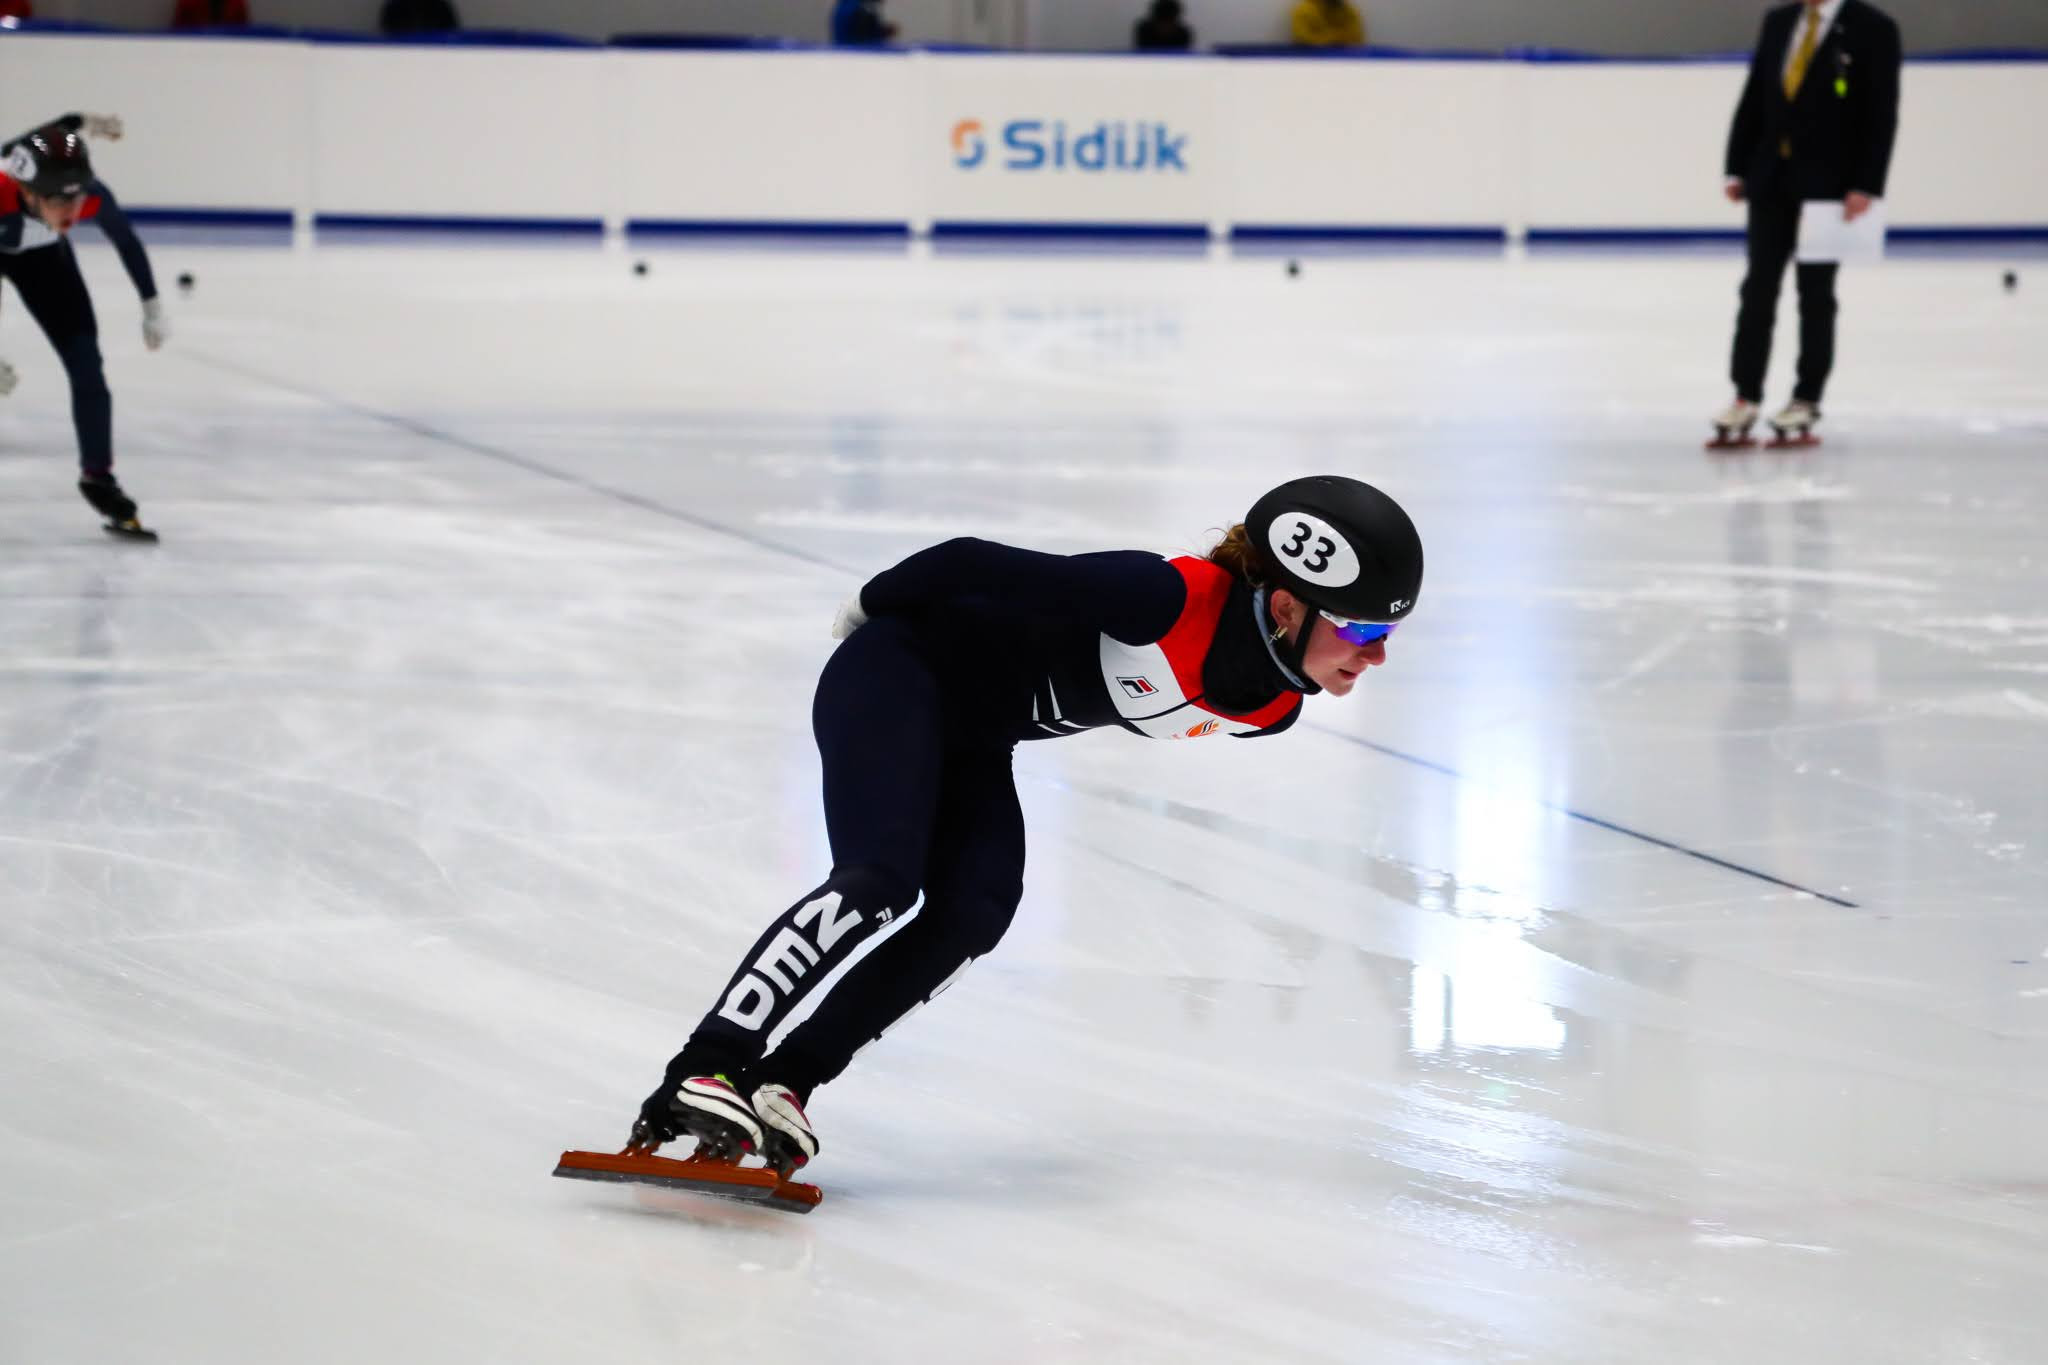 Deltrap completes clean sweep of short track golds at Winter EYOF